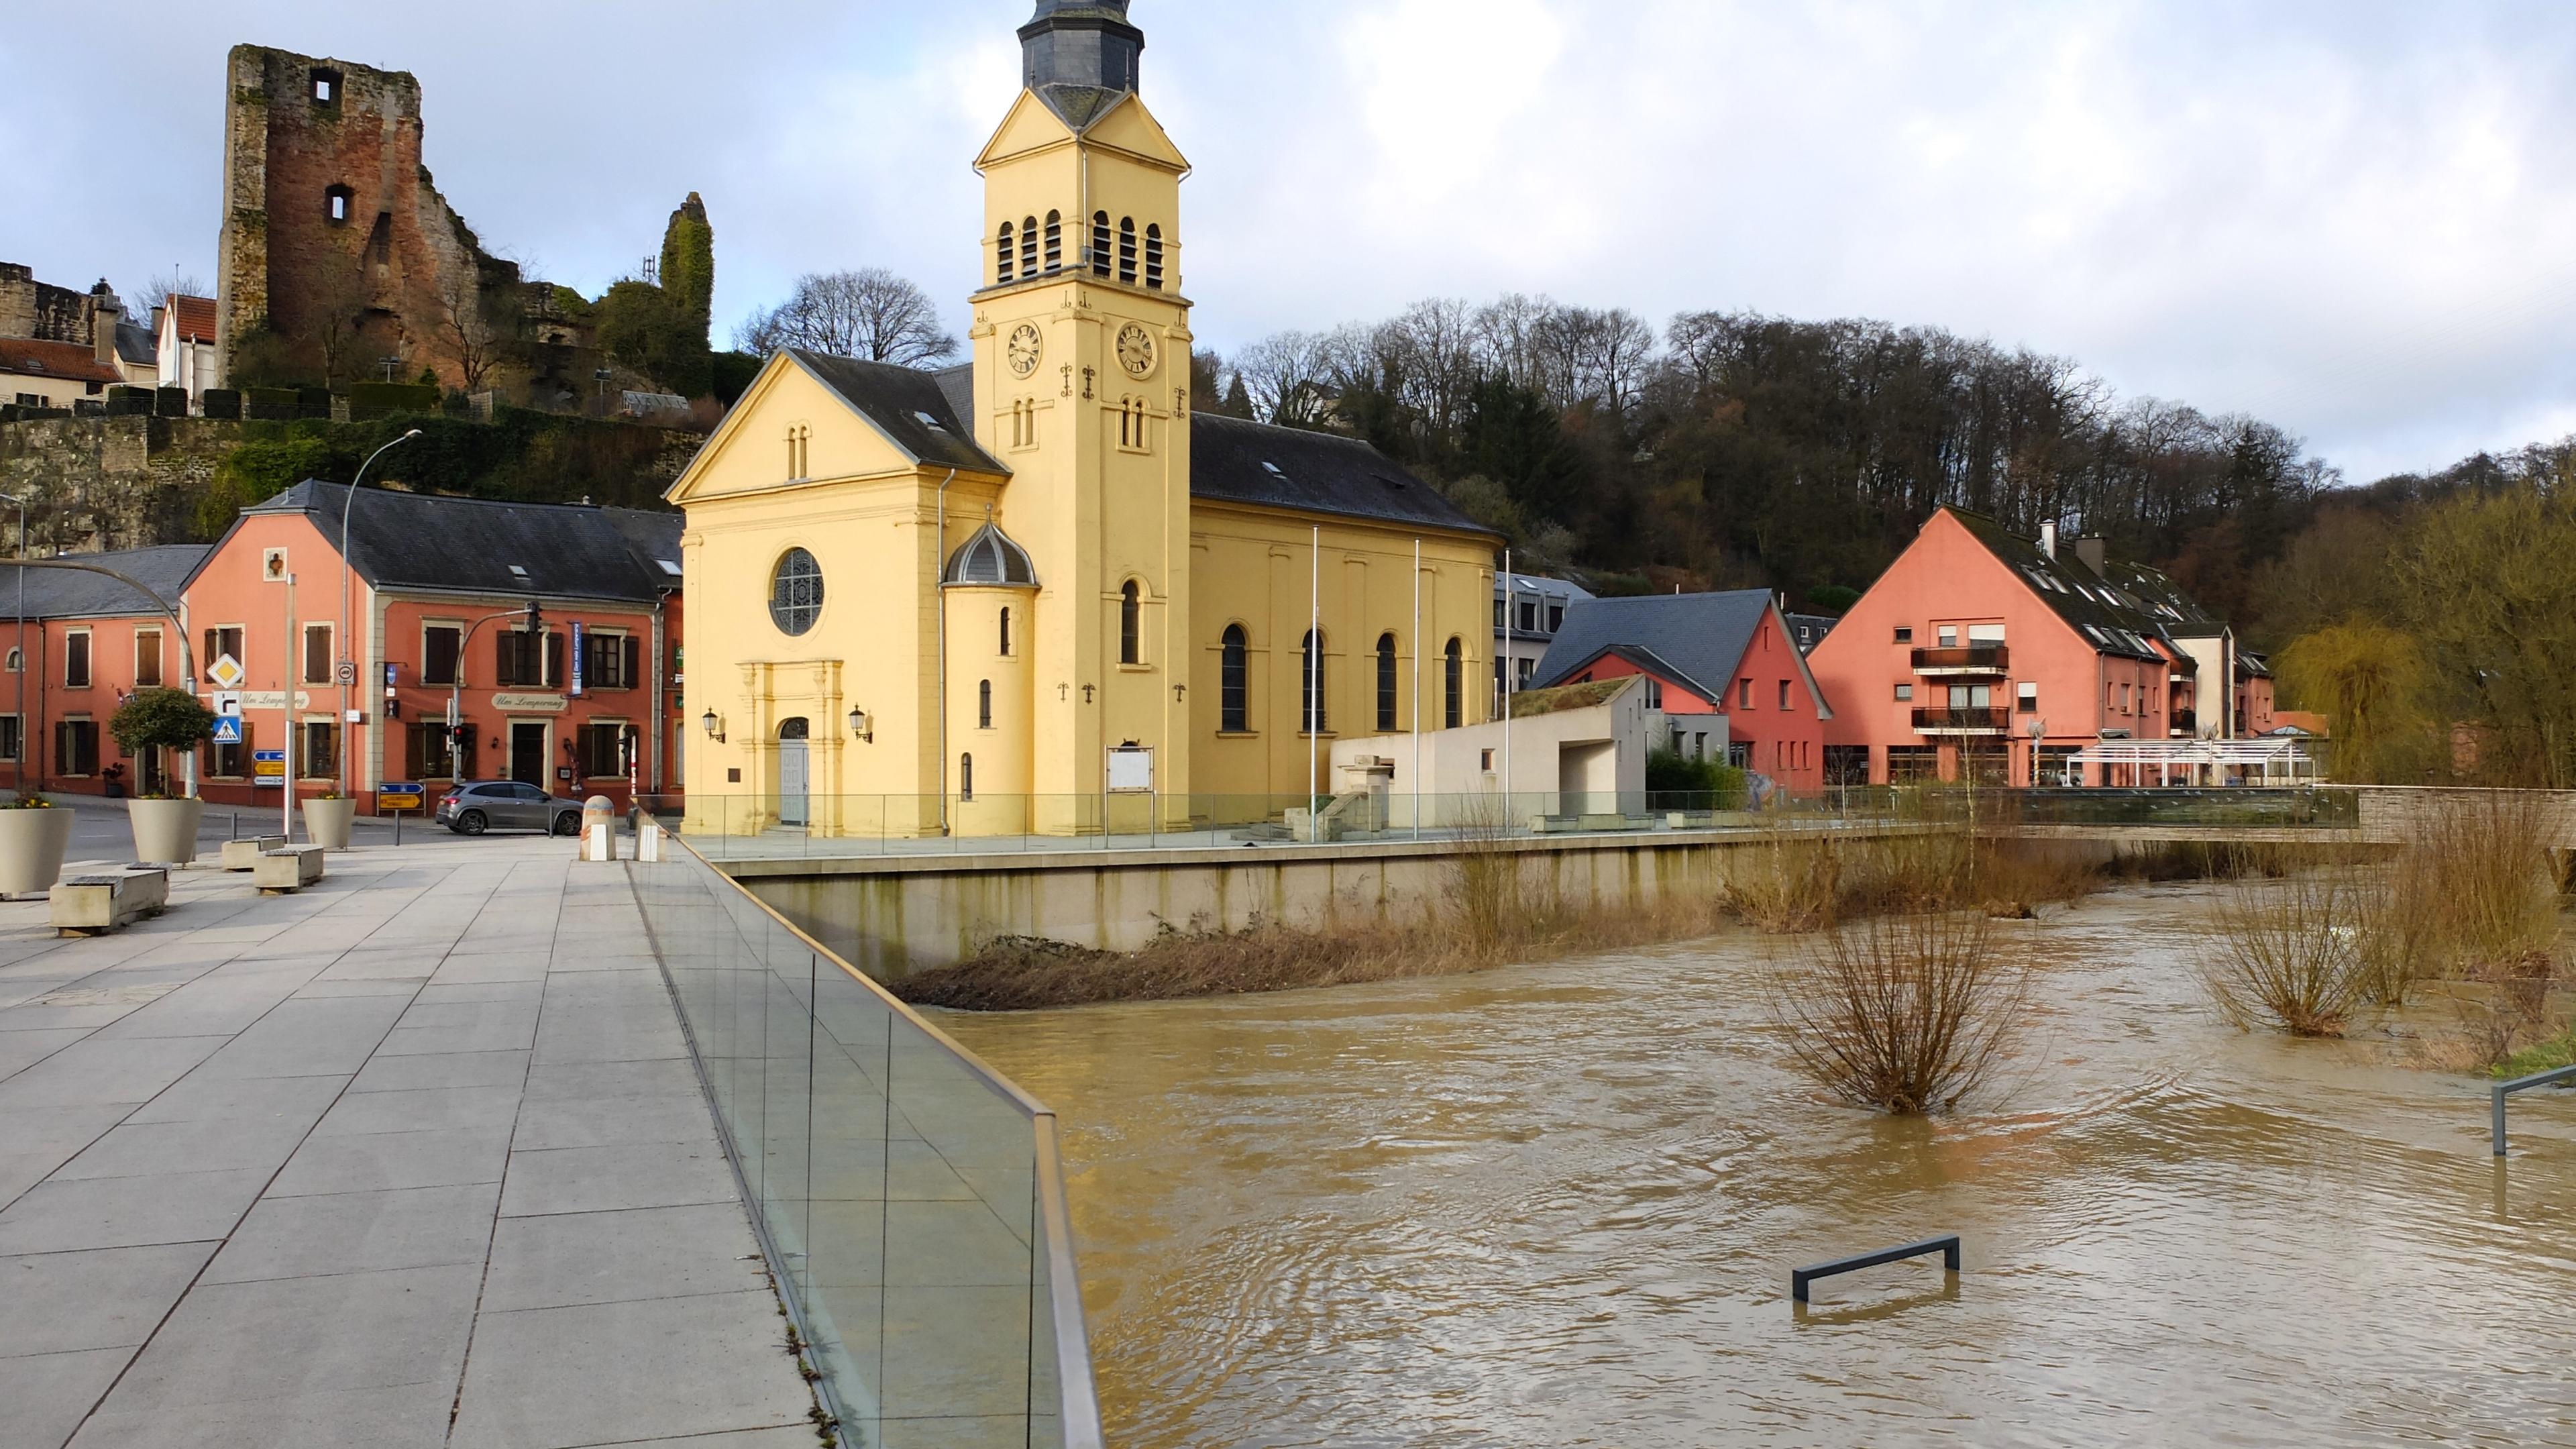 Flood warning lifted for Luxembourg as rain eases